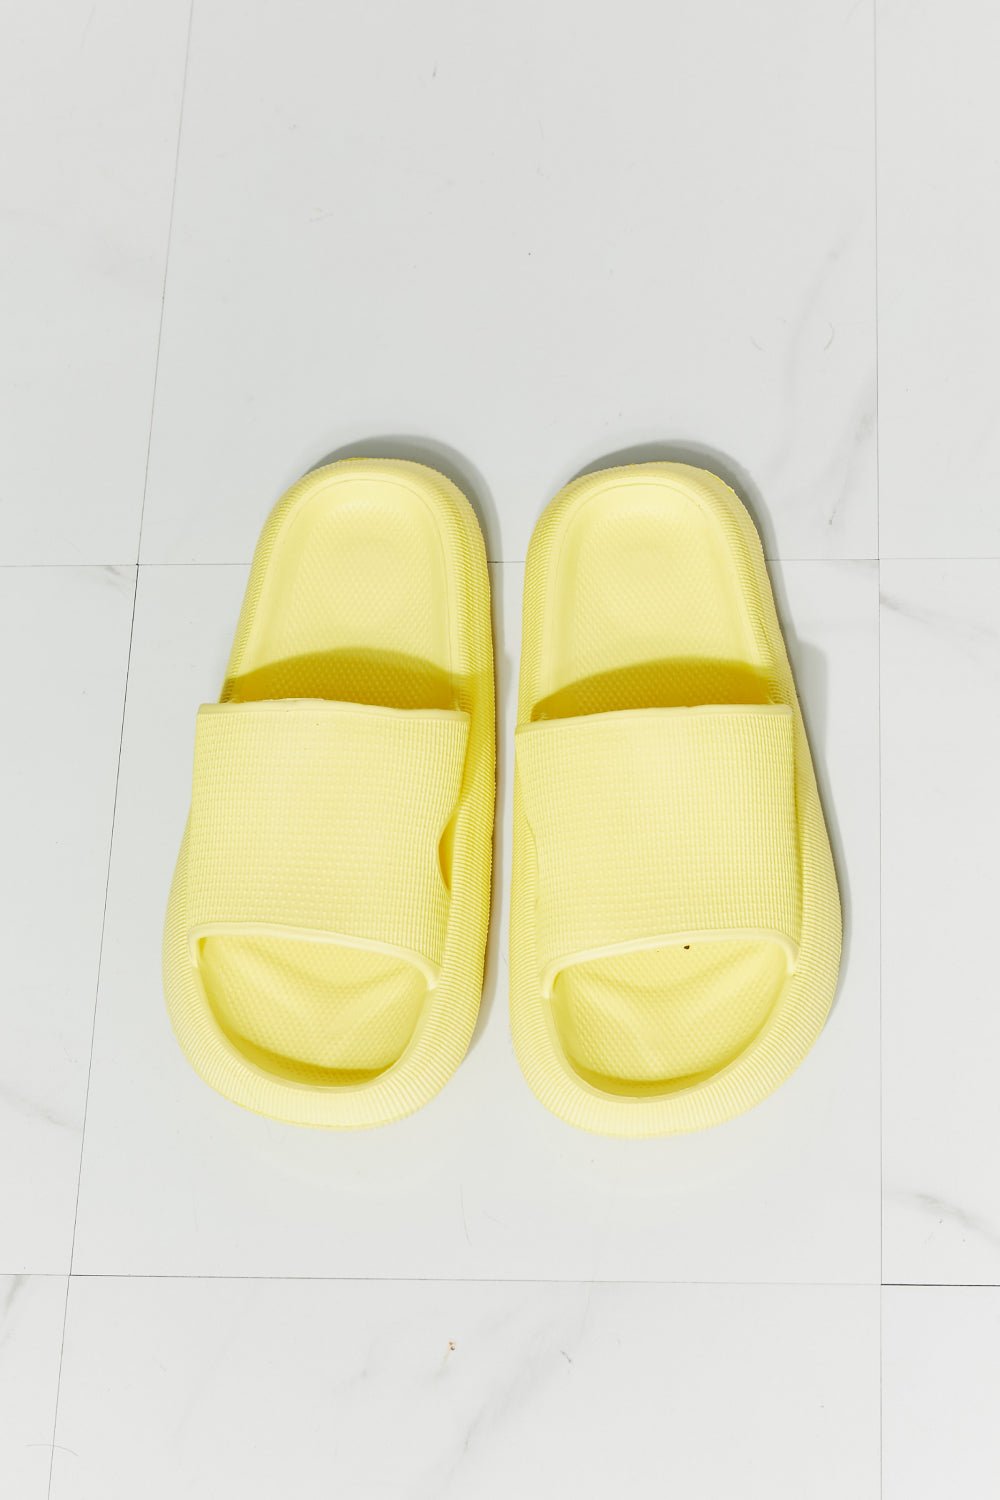 Open Toe Rubber Slide Sandals in Canary YellowSlidesMelody